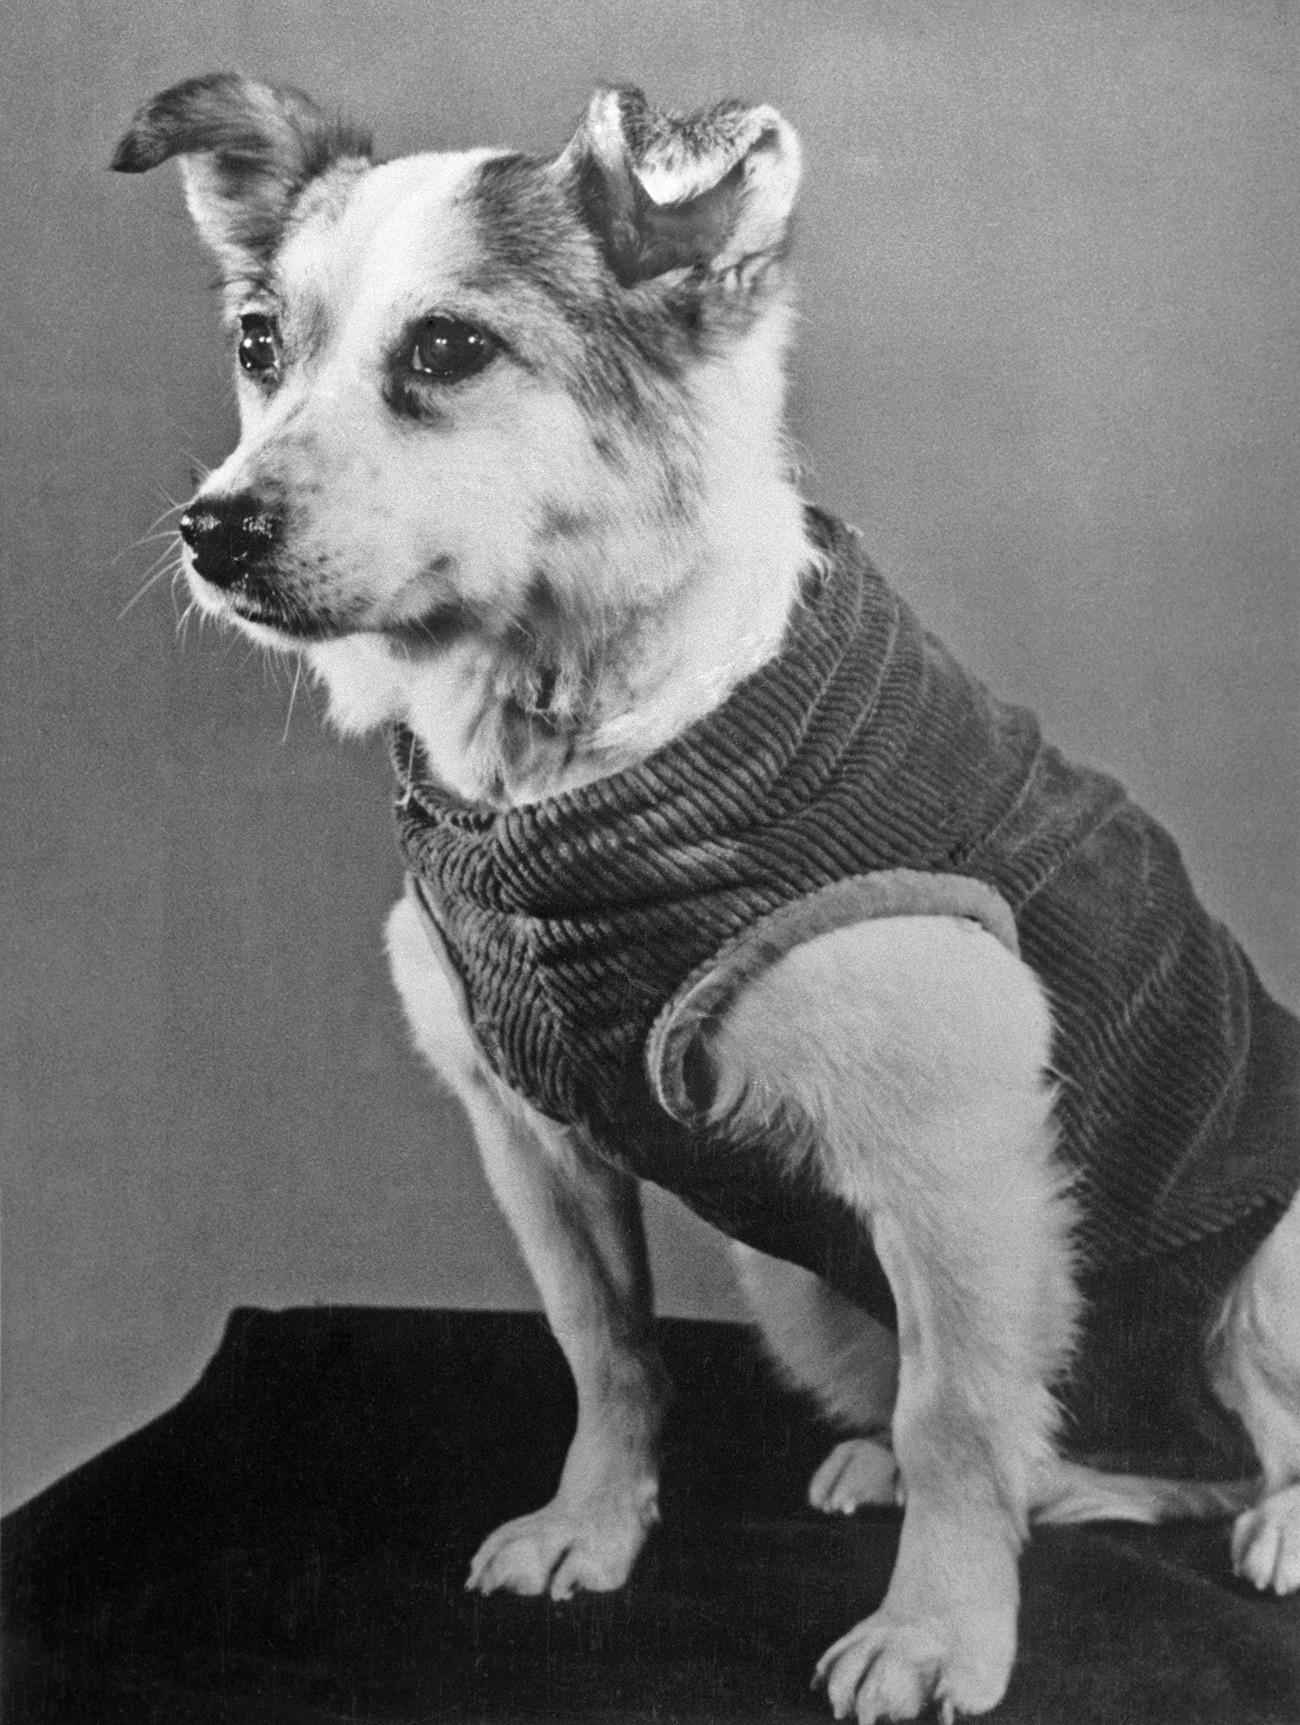 A dog called Zvezdochka (pictured) paved the way for the triumph of Yuri Gagarin's historic mission.